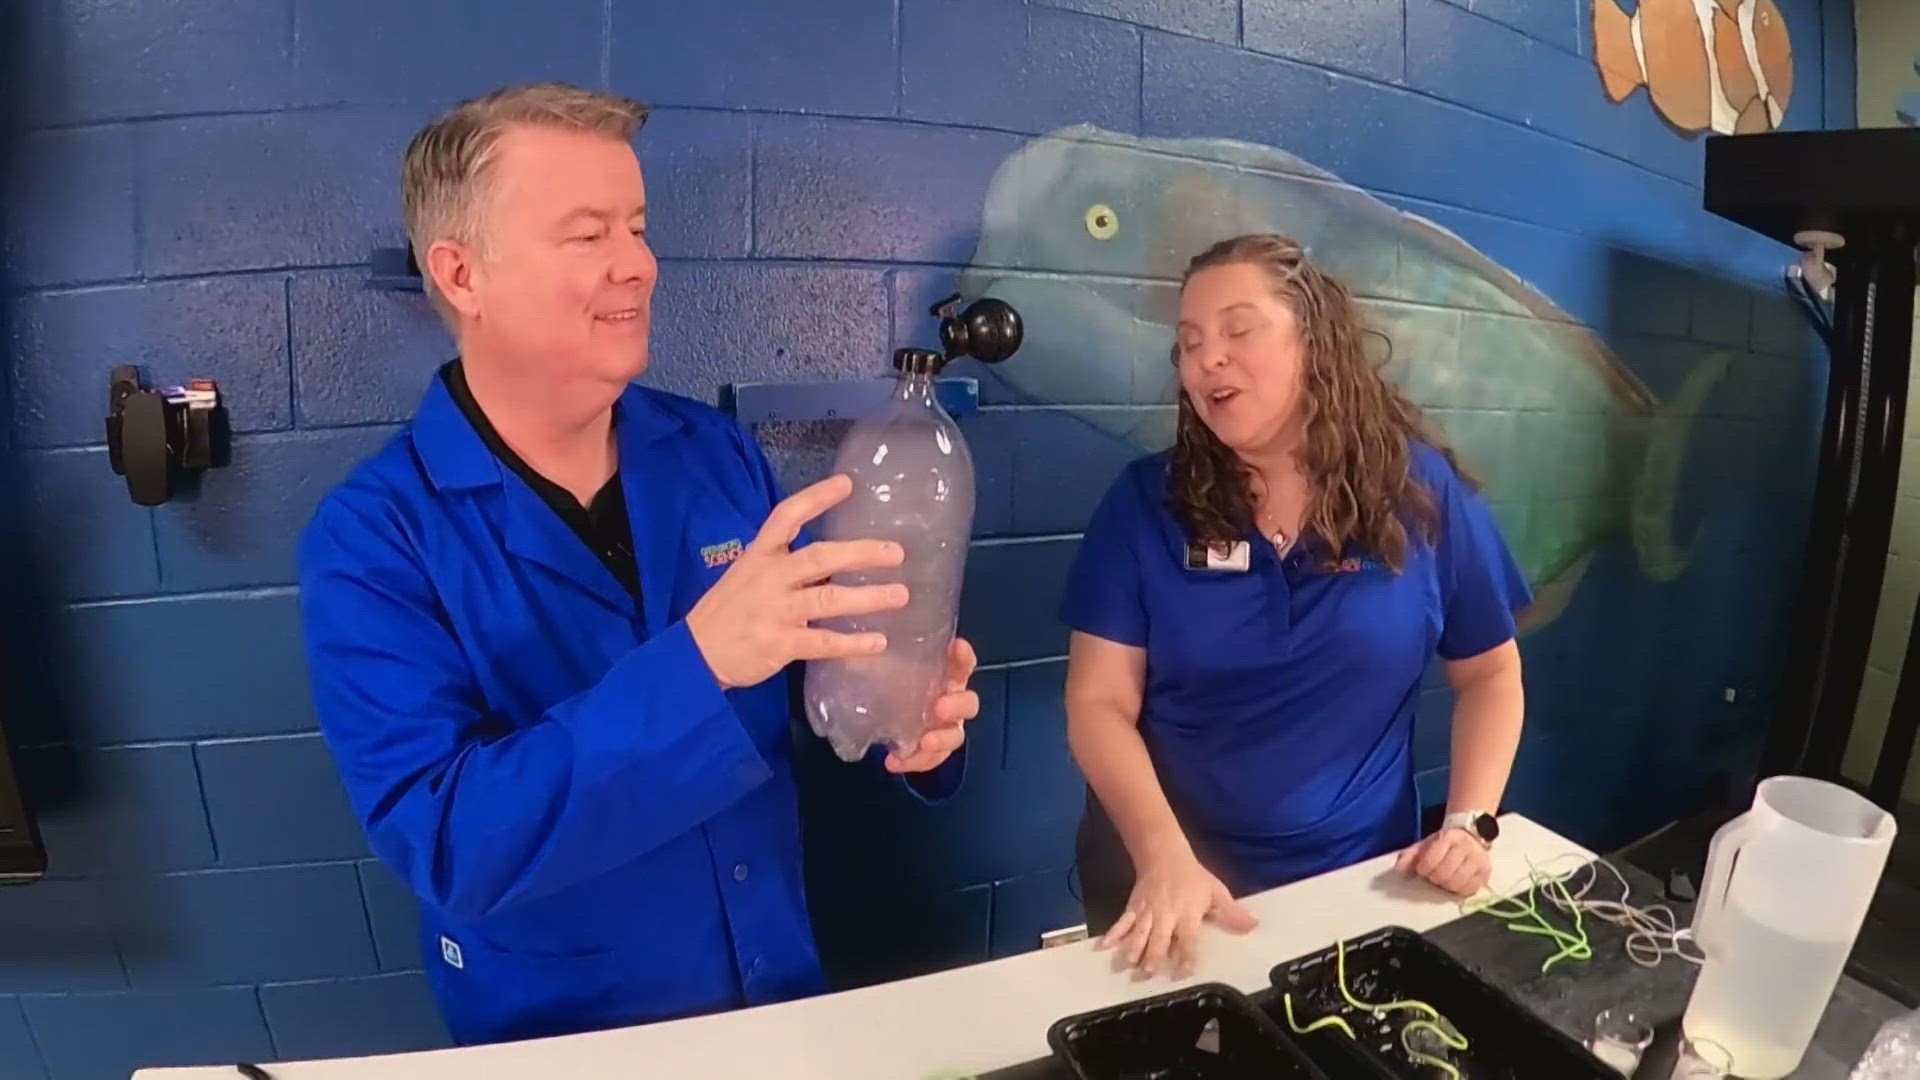 The Greensboro Science Center shares fresh content from DIY projects to animal adventures and behind-the-scenes fun, in its Science on the Spot Series.